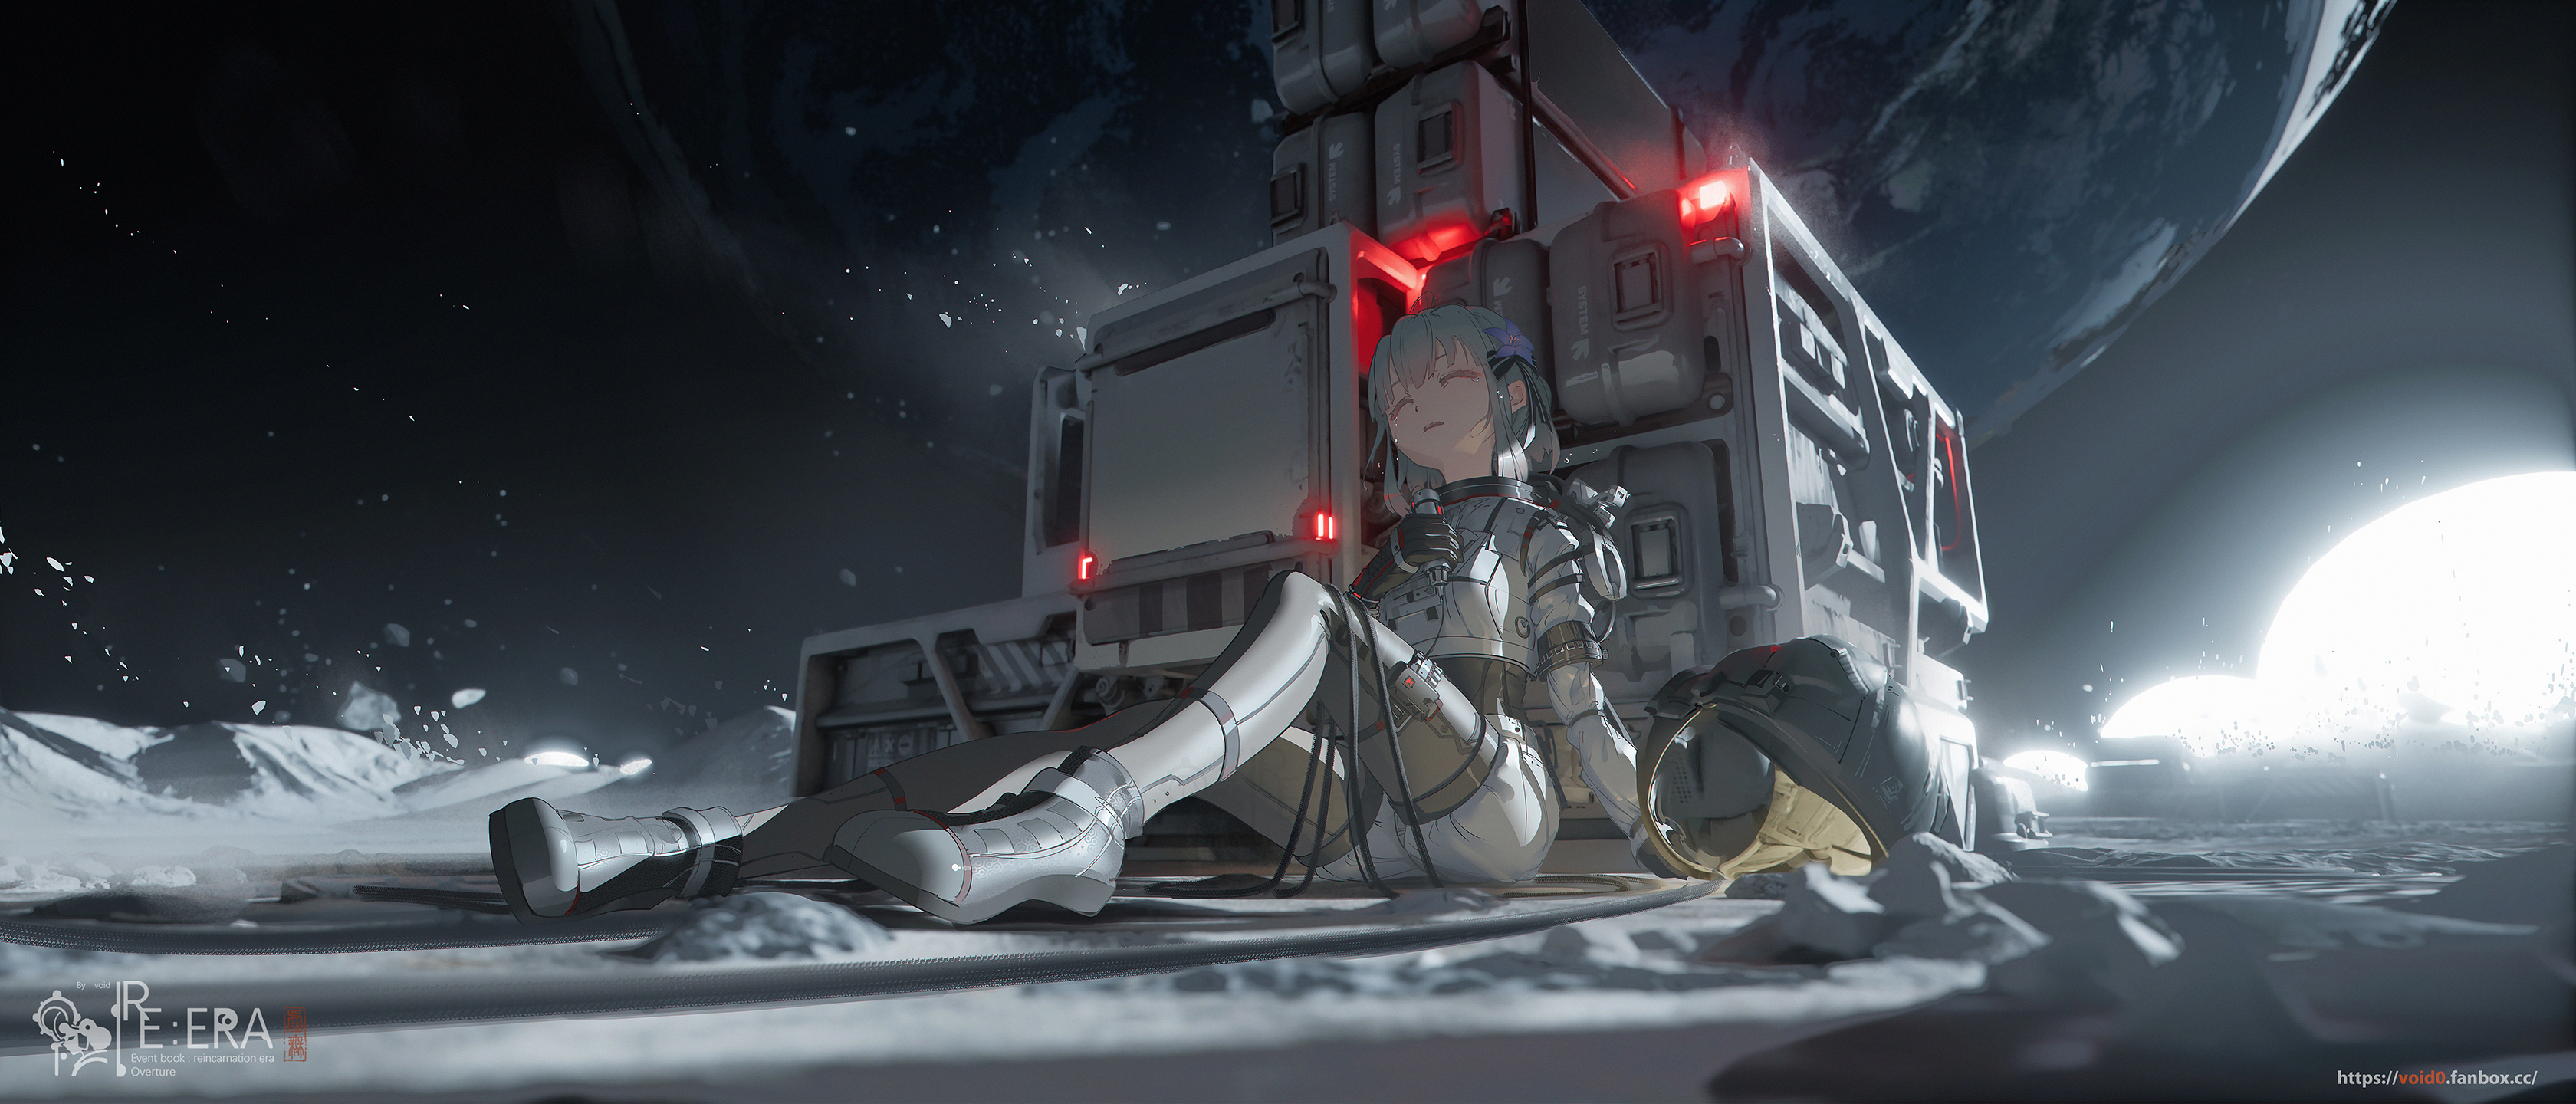 Anime Girls Void 0 Science Fiction The Wandering Earth 2 Closed Eyes Space Tears Crying Helmet 3360x1440